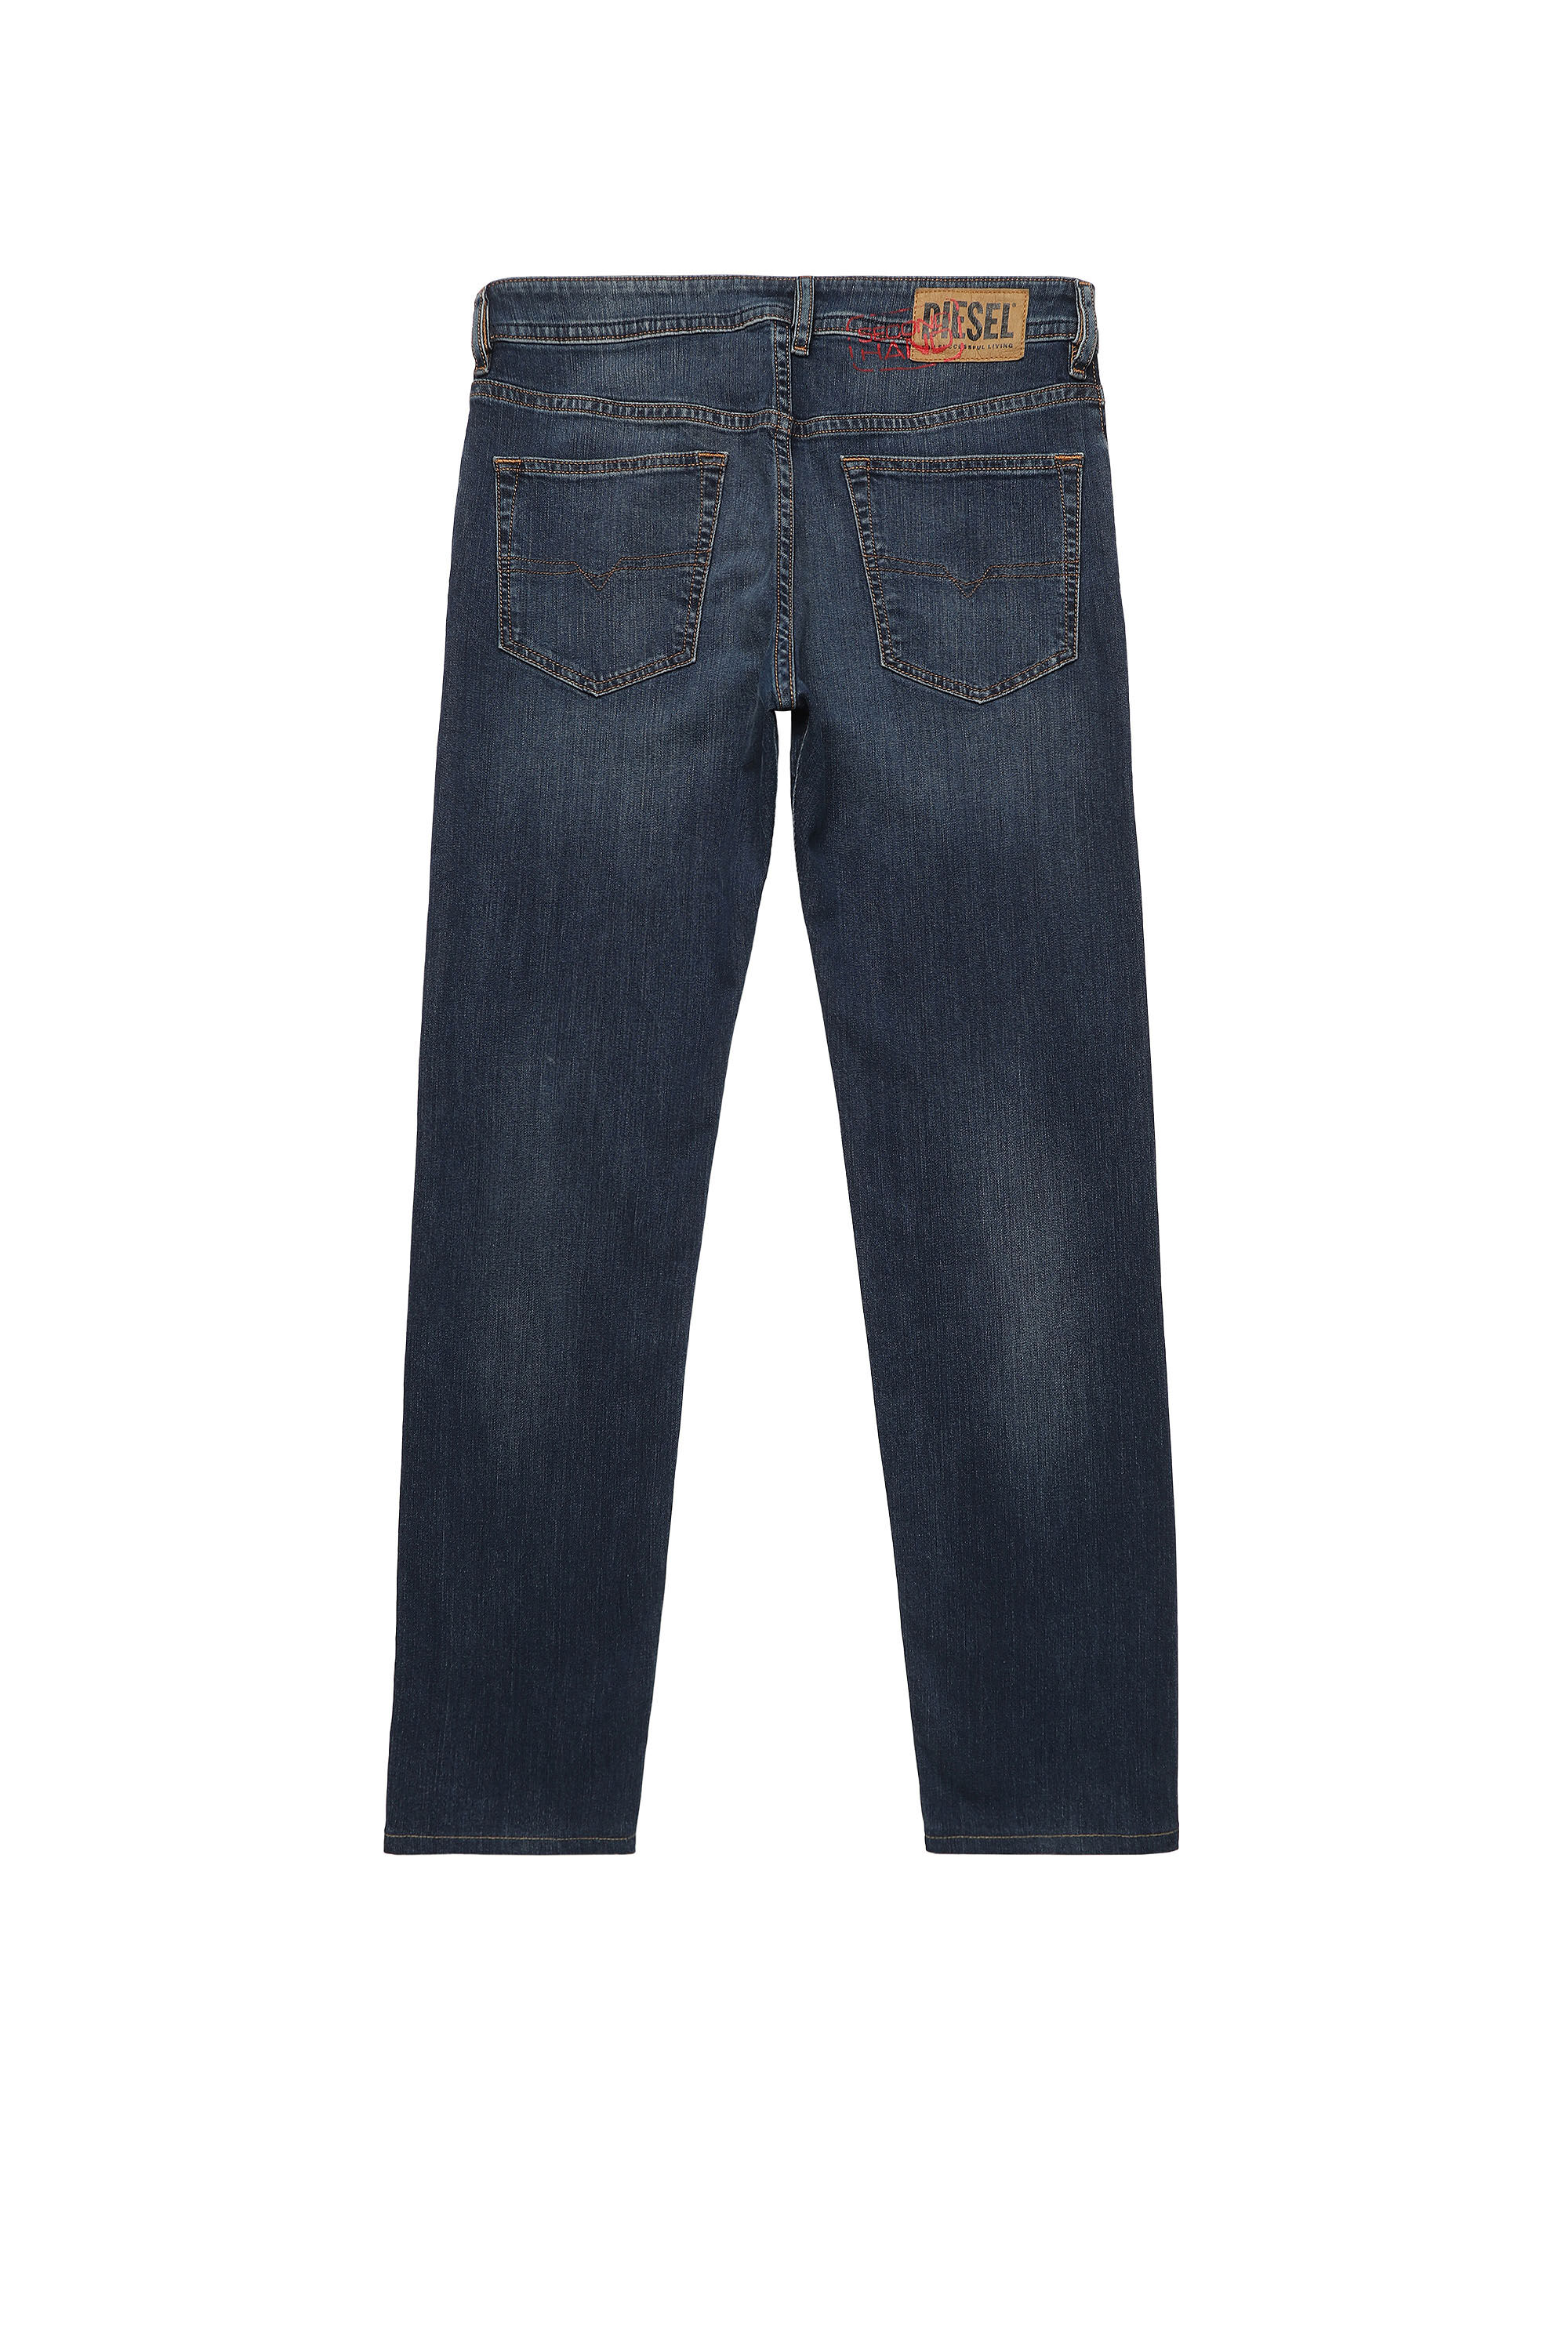 BUSTER Man Jeans | Diesel Second Hand